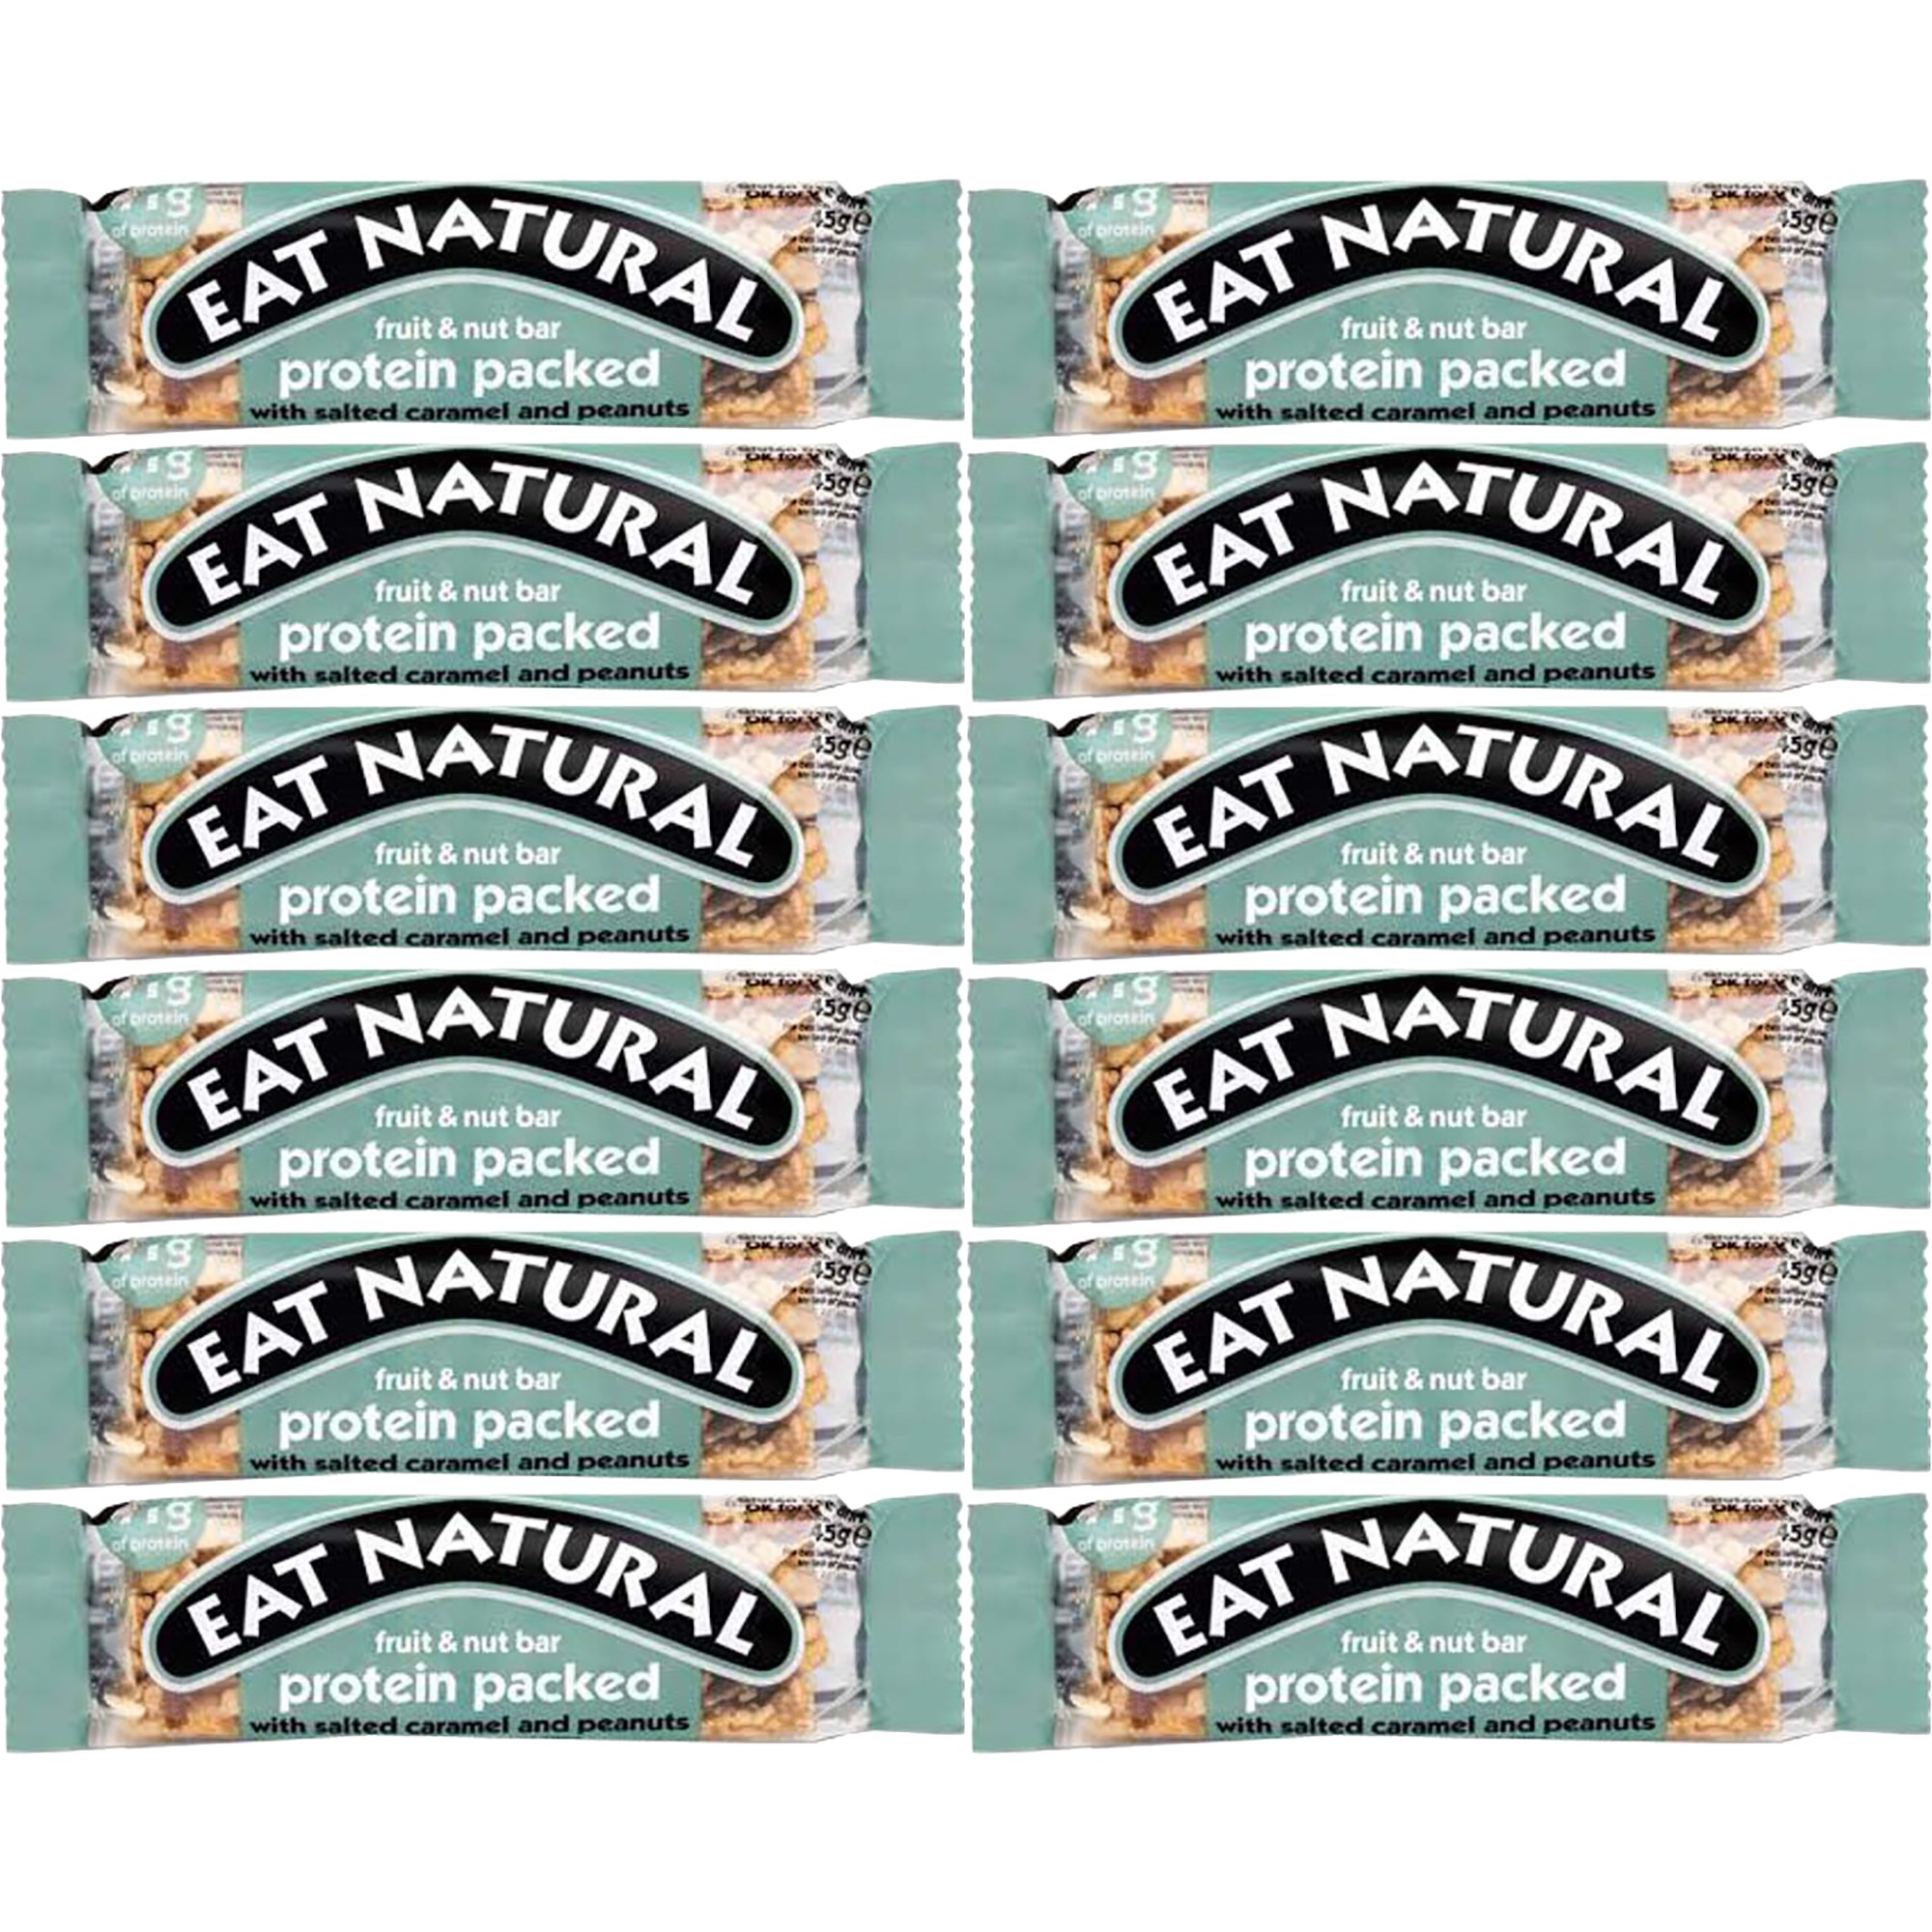 Läs mer om Eat Natural Protein Packed Salted Caramel & Nuts 12 x 45g